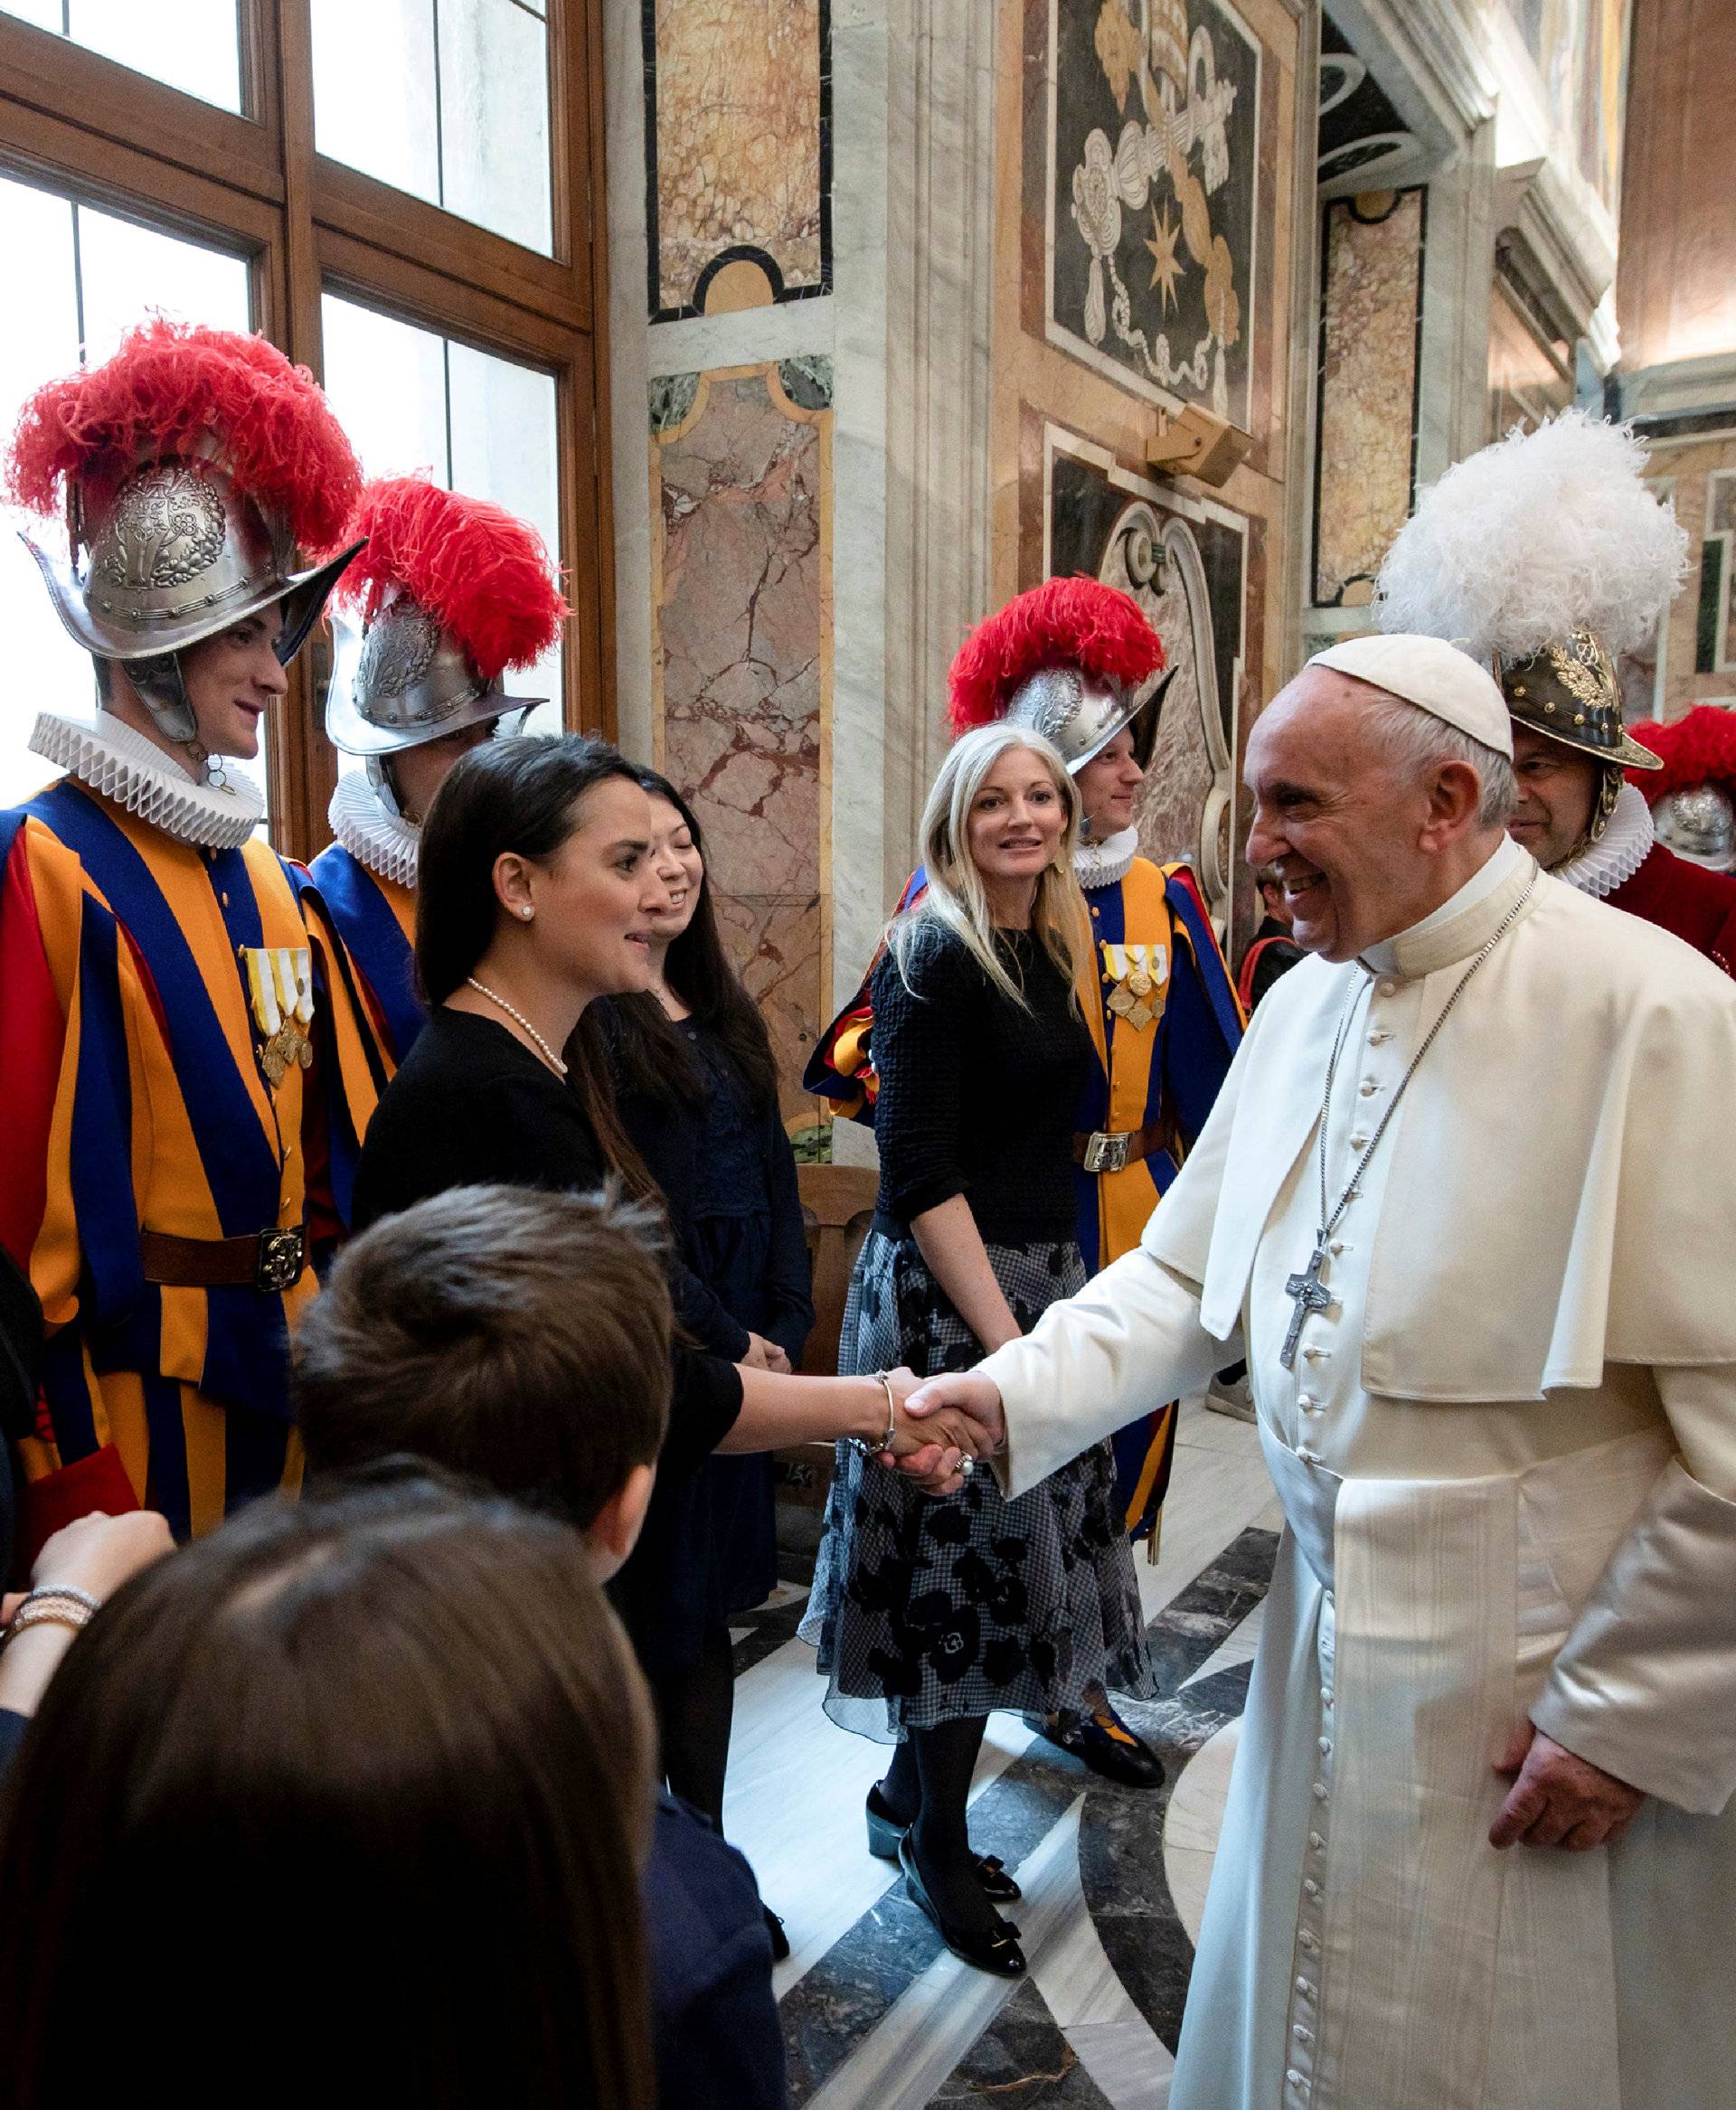 Pope Francis greets relatives of Swiss guards the day ahead of their swearing-in ceremony at the Vatican